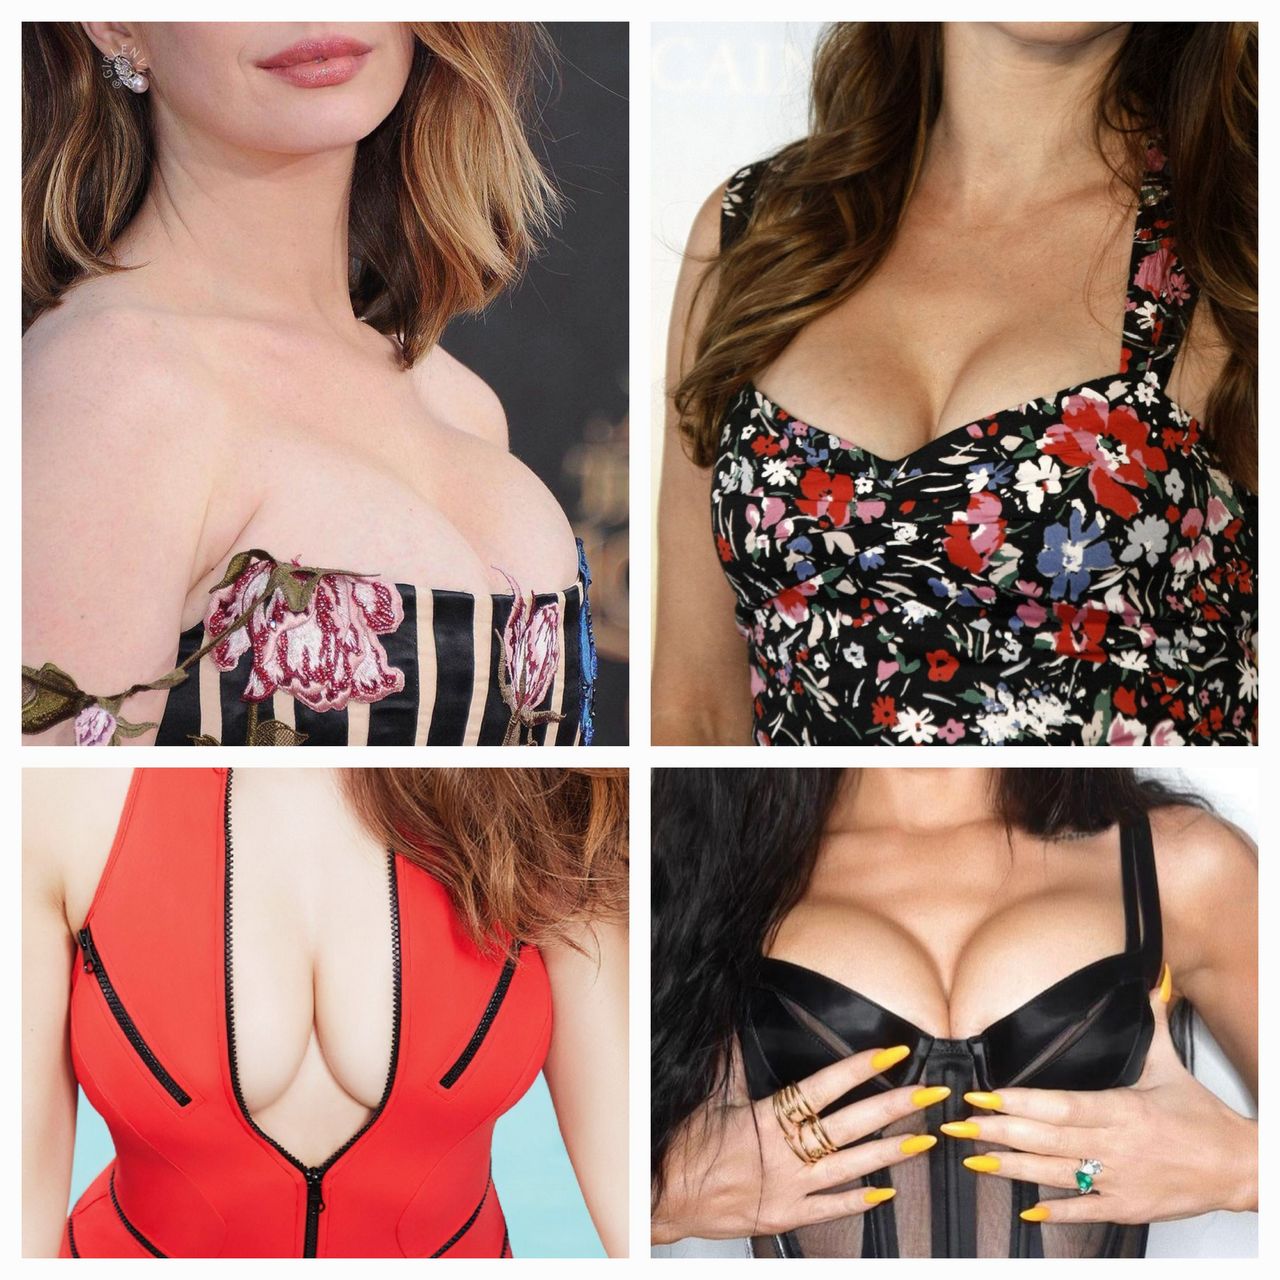 Guess The Actress Based On Heir Breast Rank Them NSFW